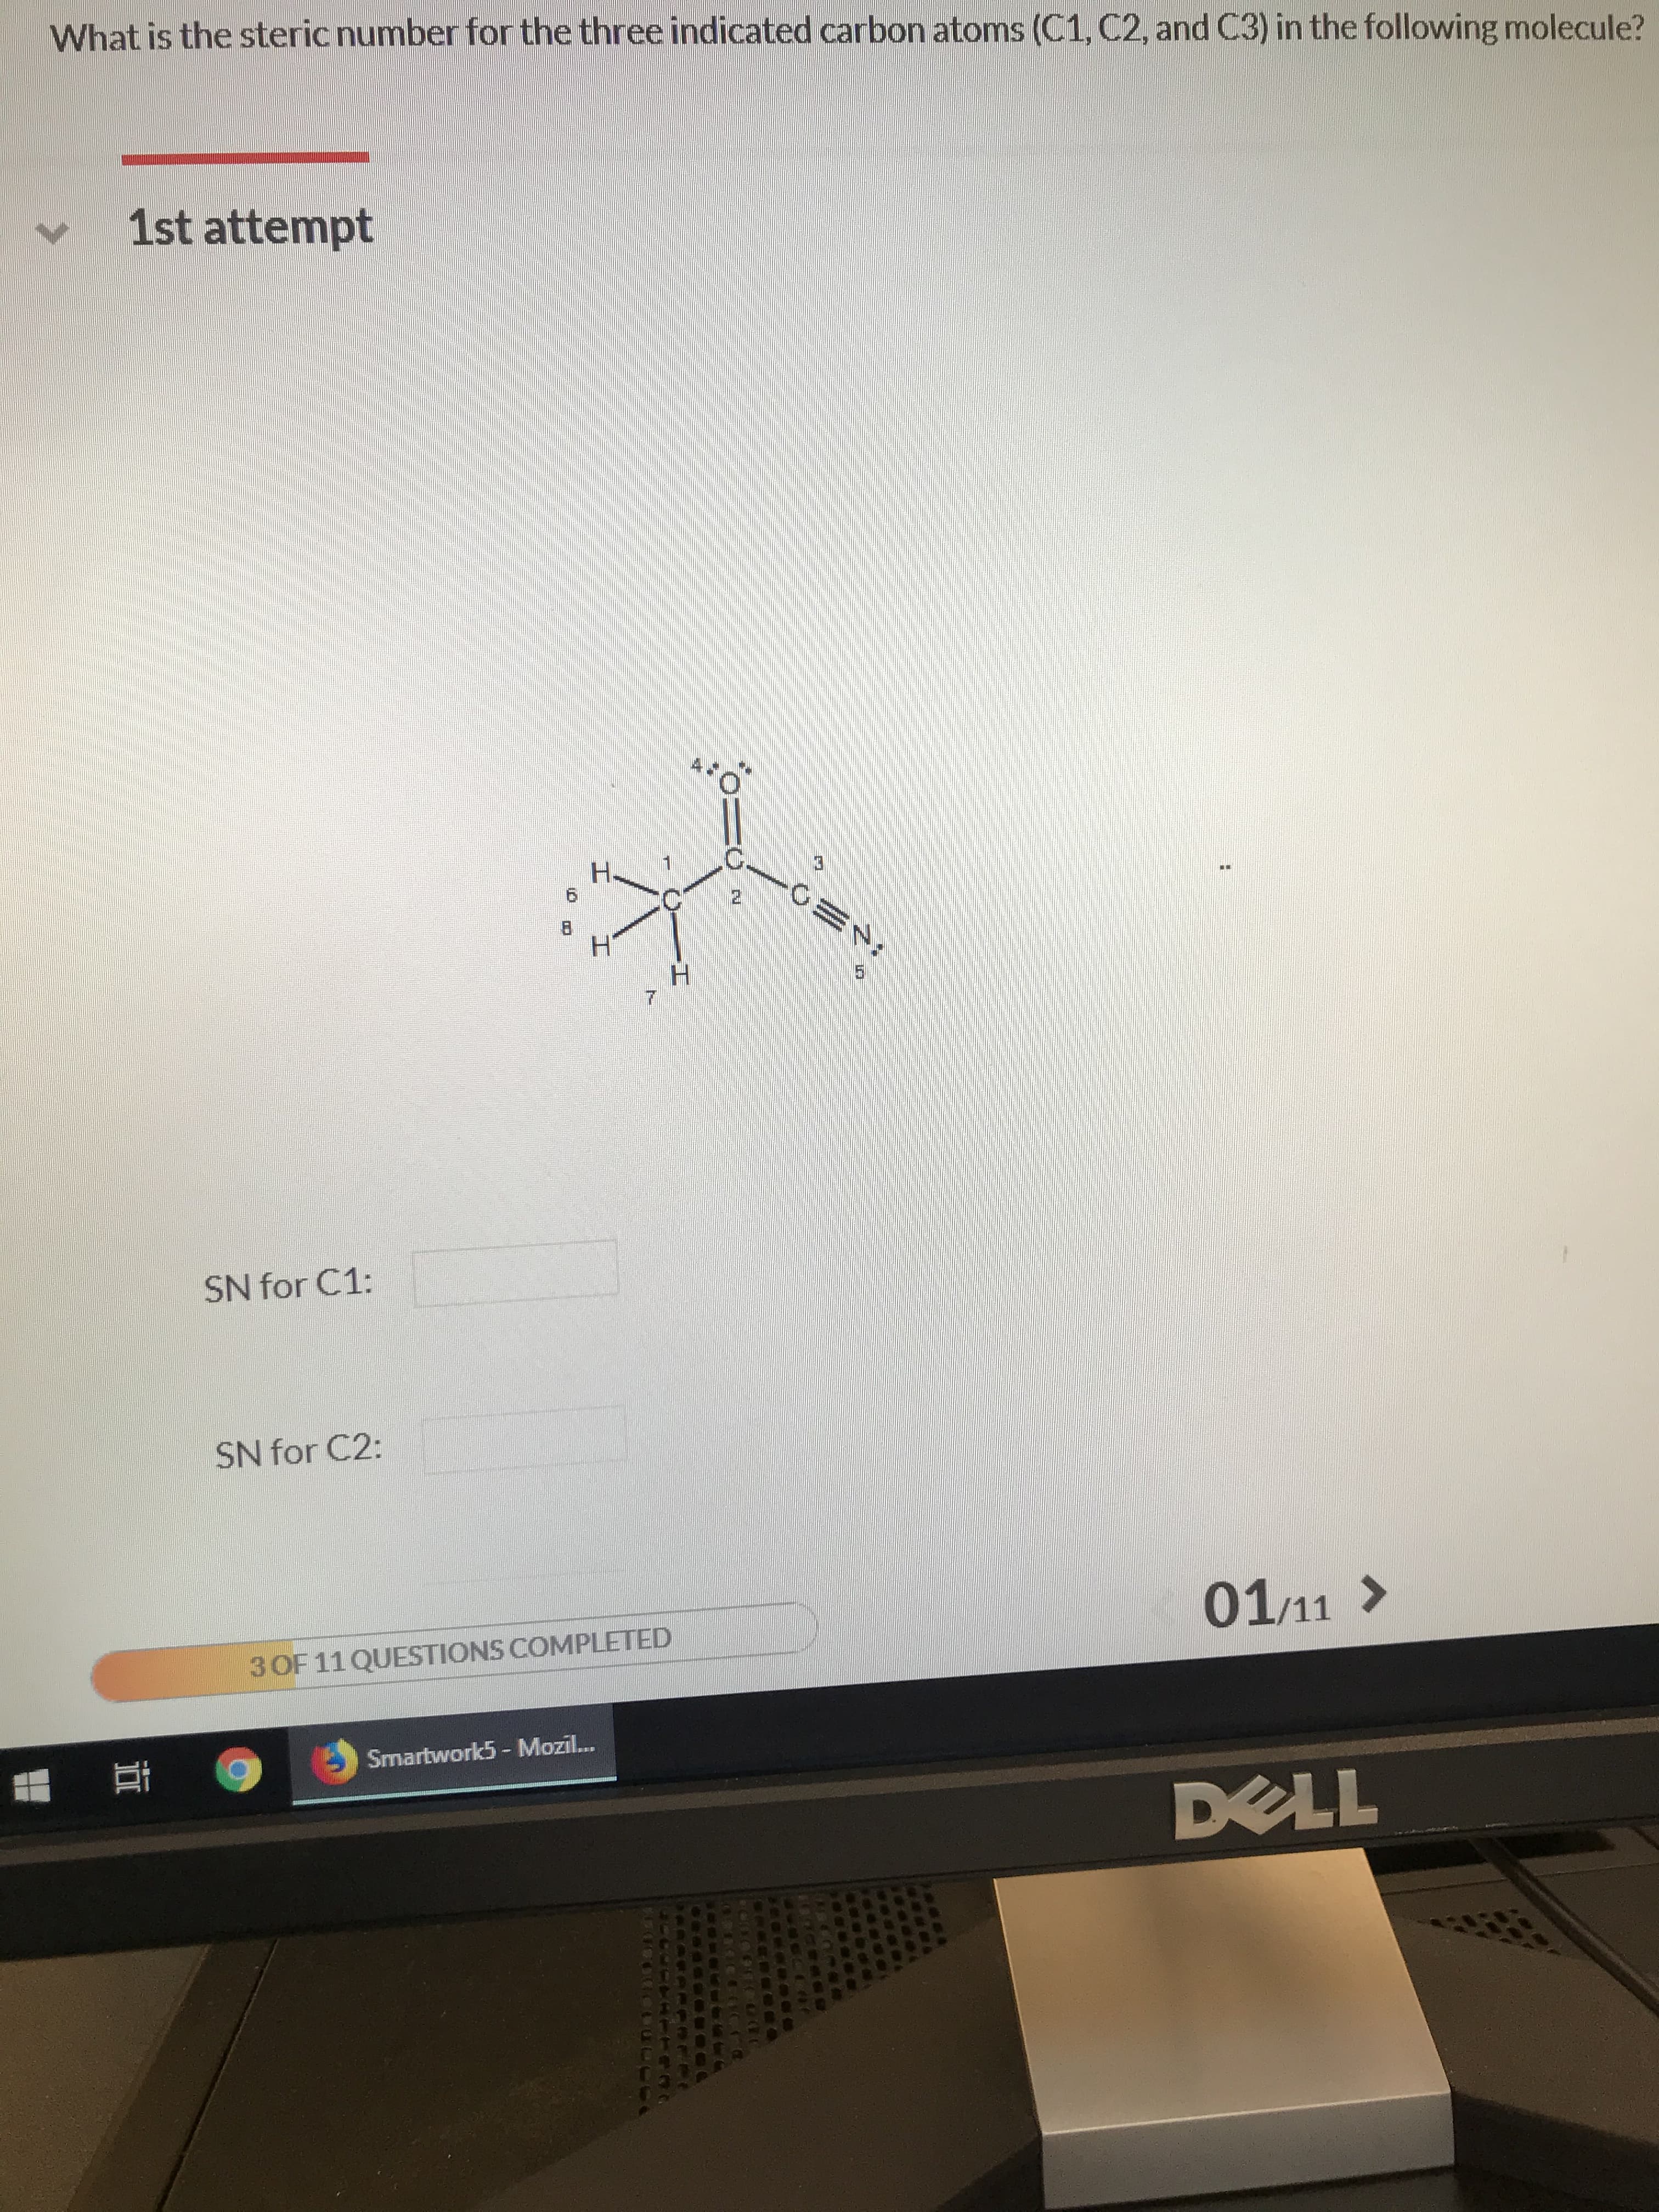 What is the steric number for the three indicated carbon atoms (C1, C2, and C3) in the following molecule?
1st attempt
H-
6
2
H
5
SN for C1:
SN for C2:
01/11
3 OF11 QUESTIONS COMPLETED
Smartwork5 - Mozil...
DELL
REA
( OGO
roc
CC
